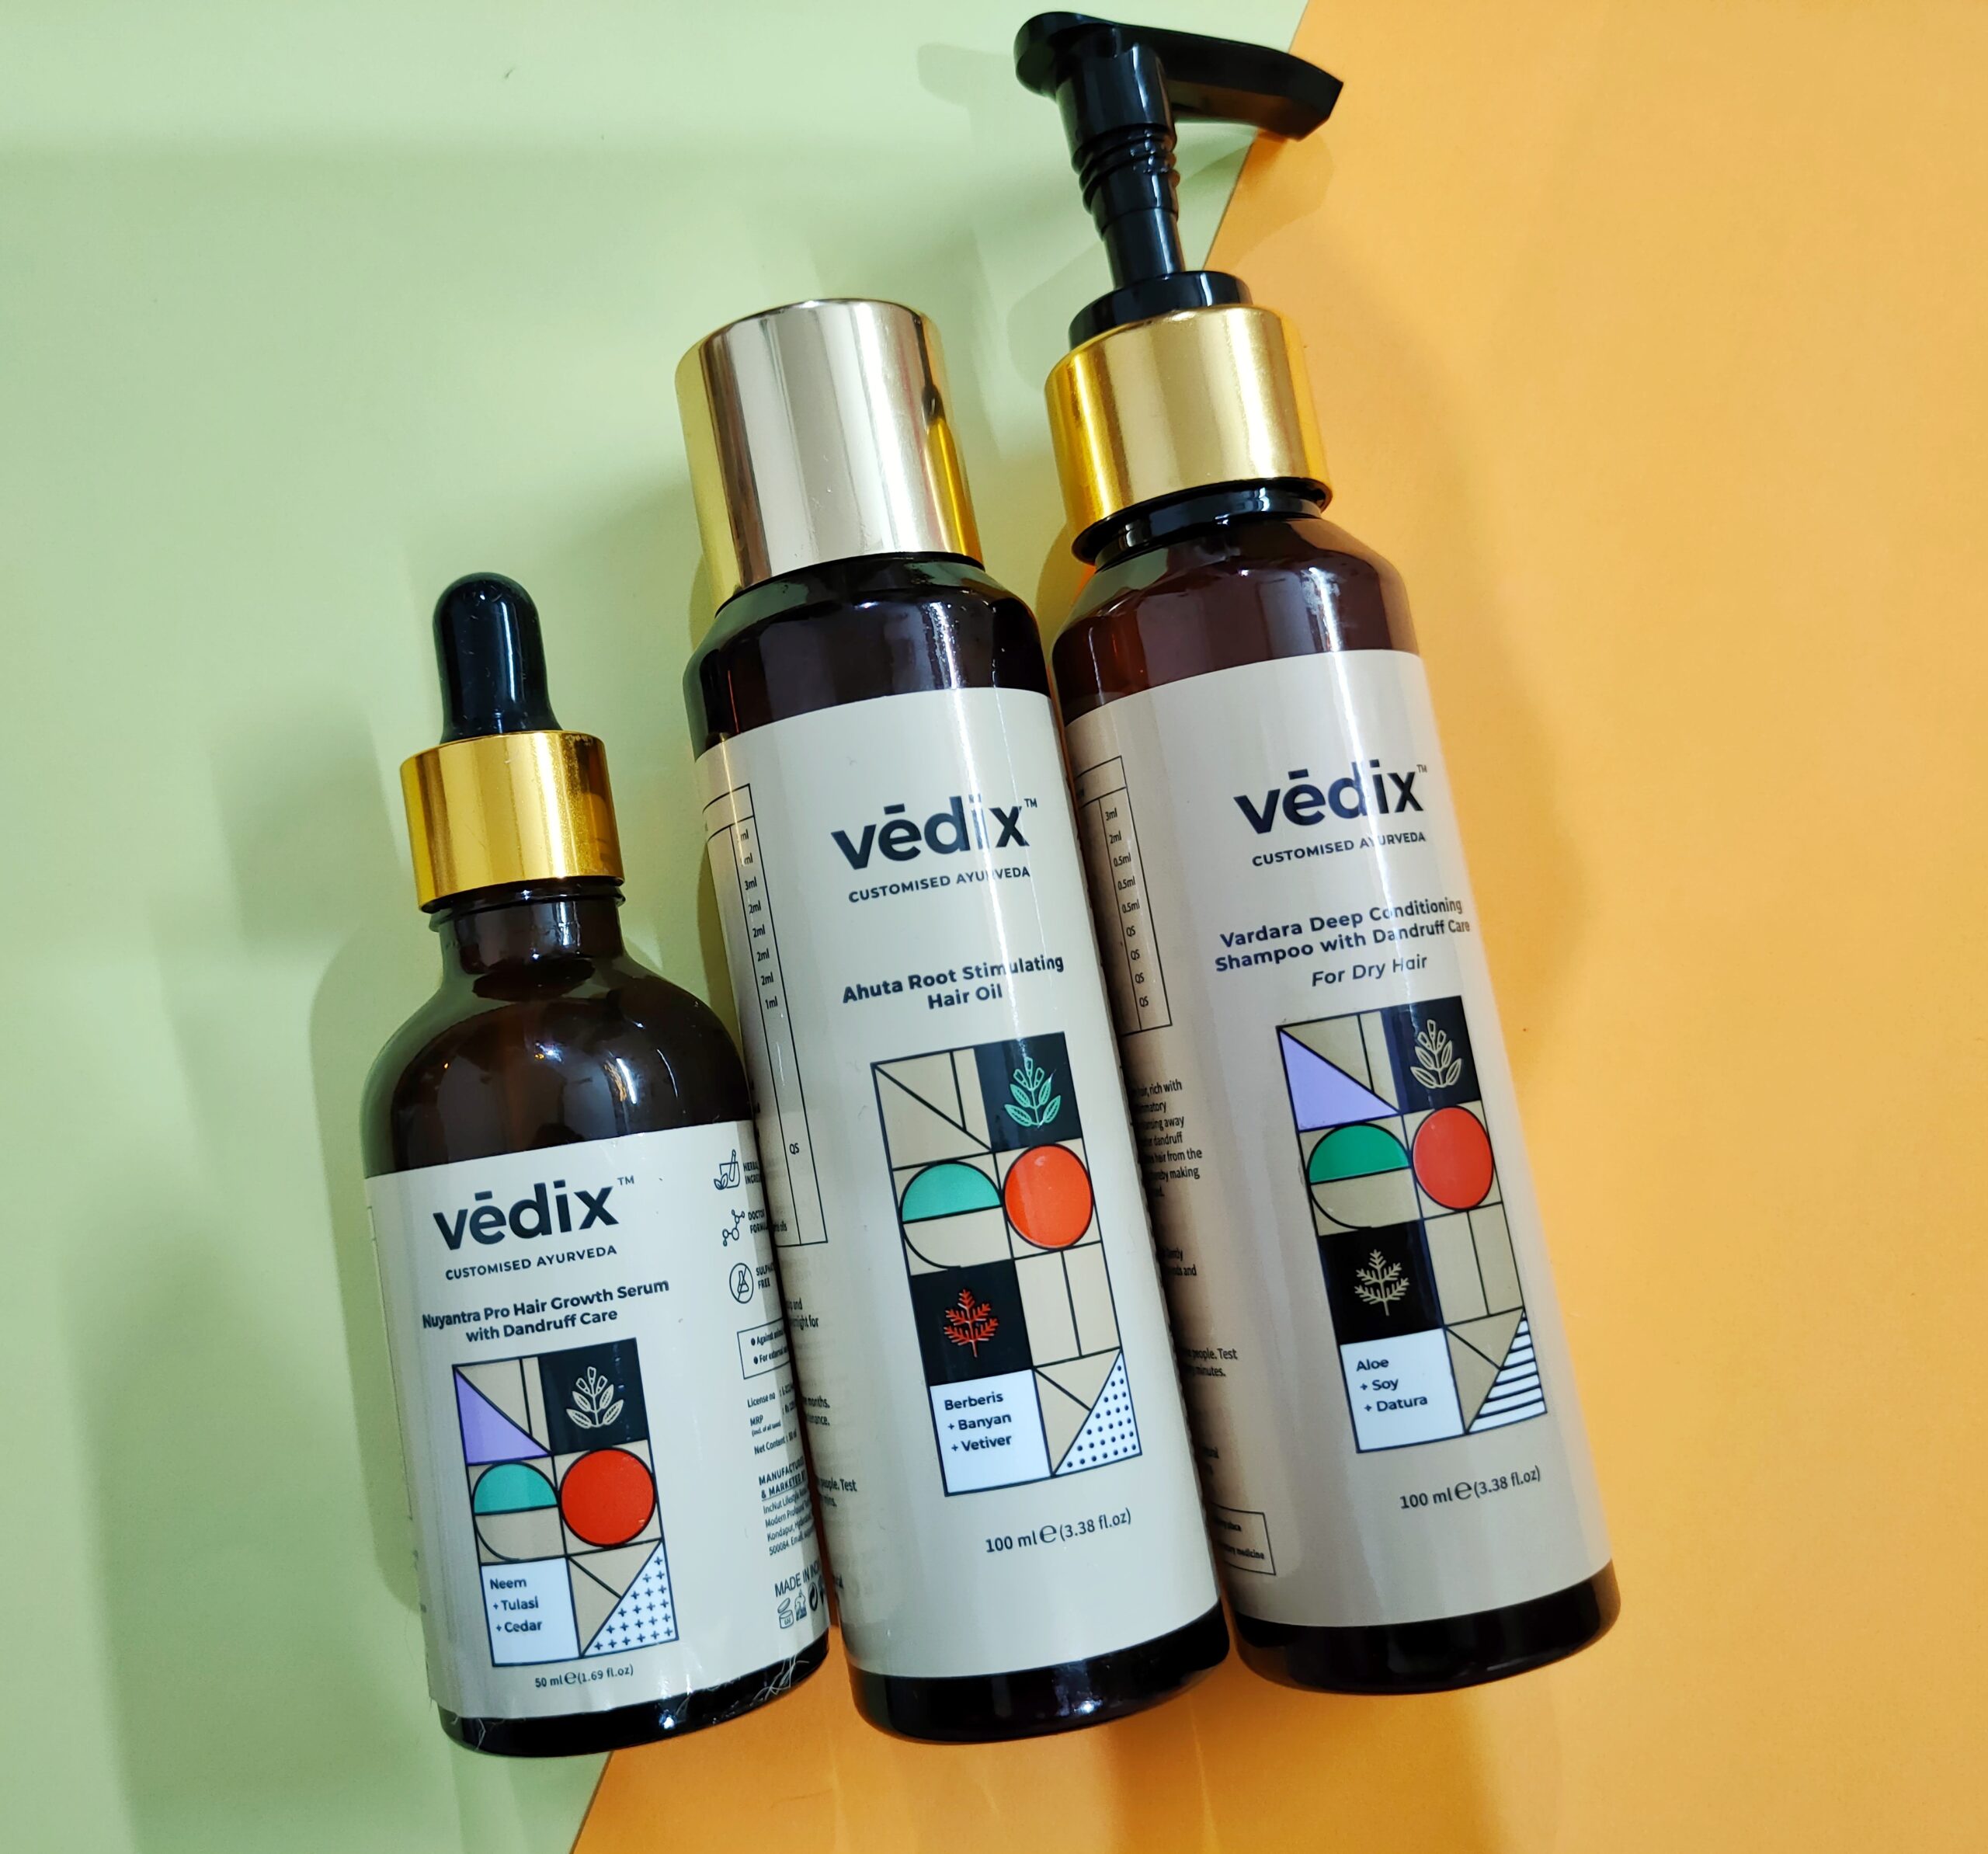 Vedix haircare products